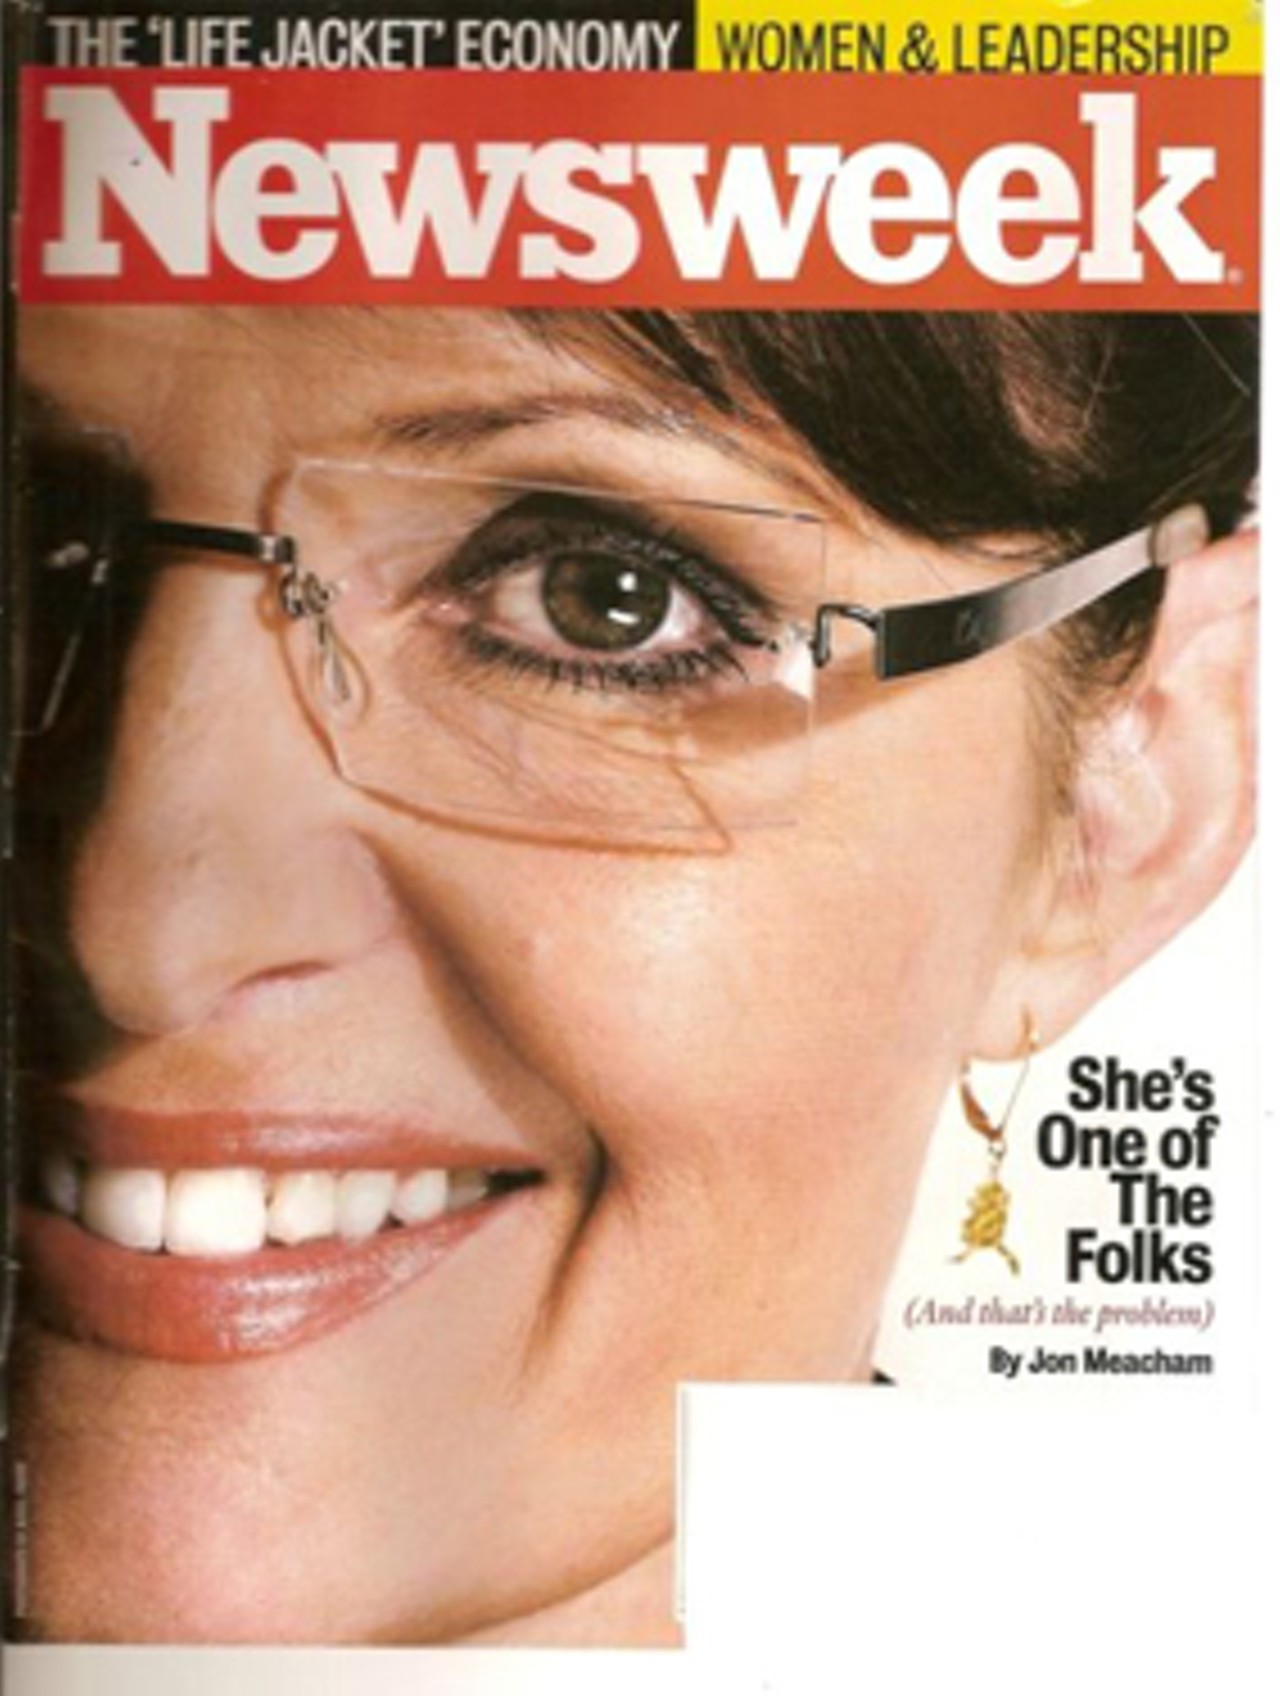 The editors at Newsweek magazine received a lot of flak over not retouching this photo of Sarah Palin. If you look at really, really closely, you'll notice a mustache. She really is "one of the folks."